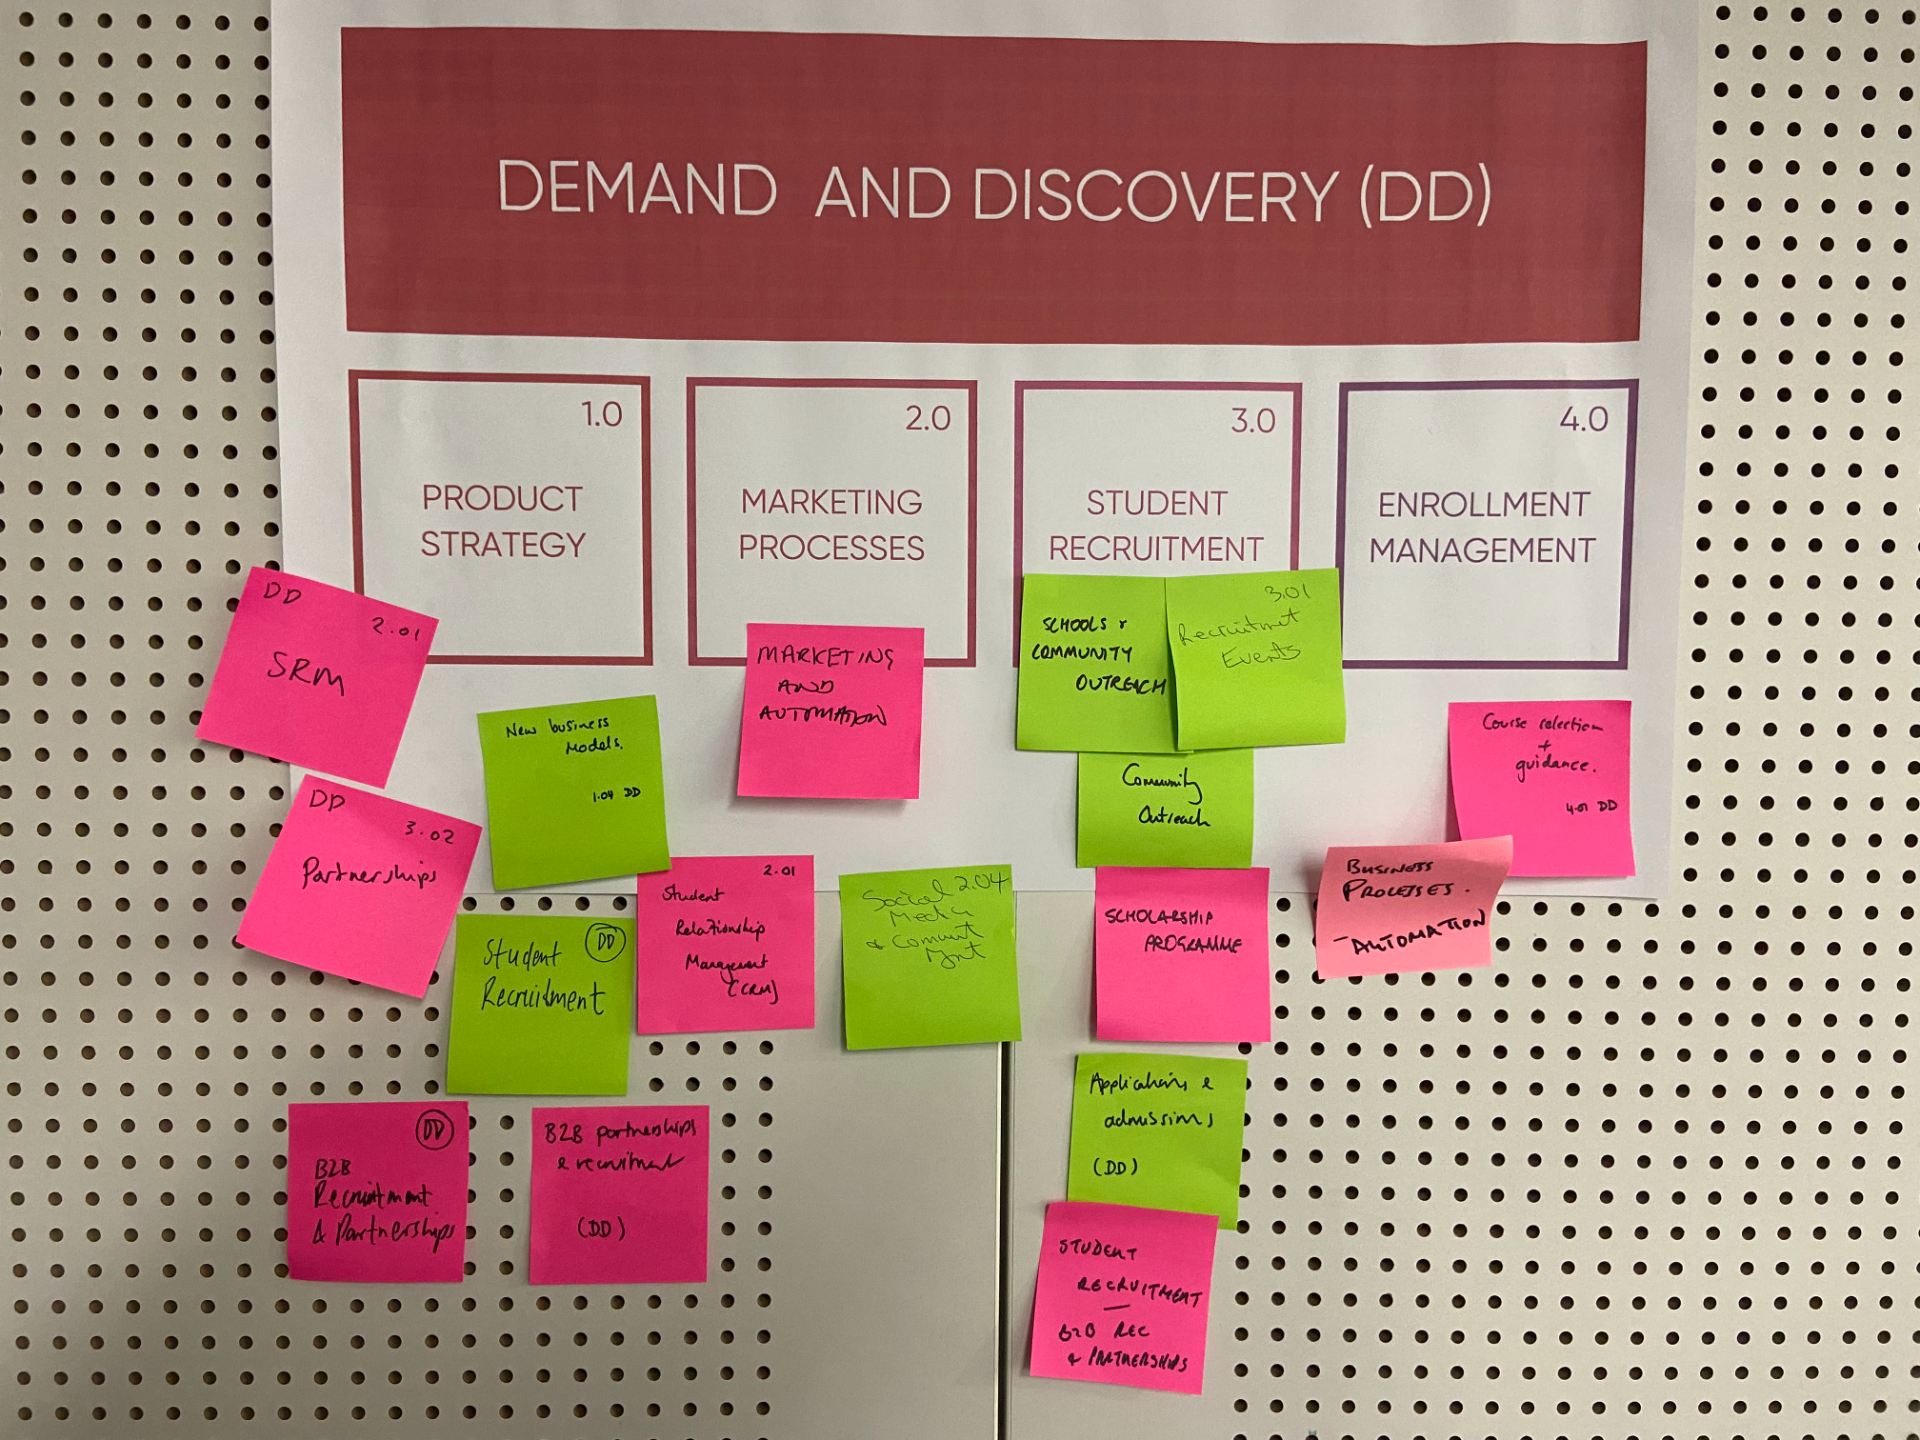 Demand and Discovery (DD) poster with post-it notes on.